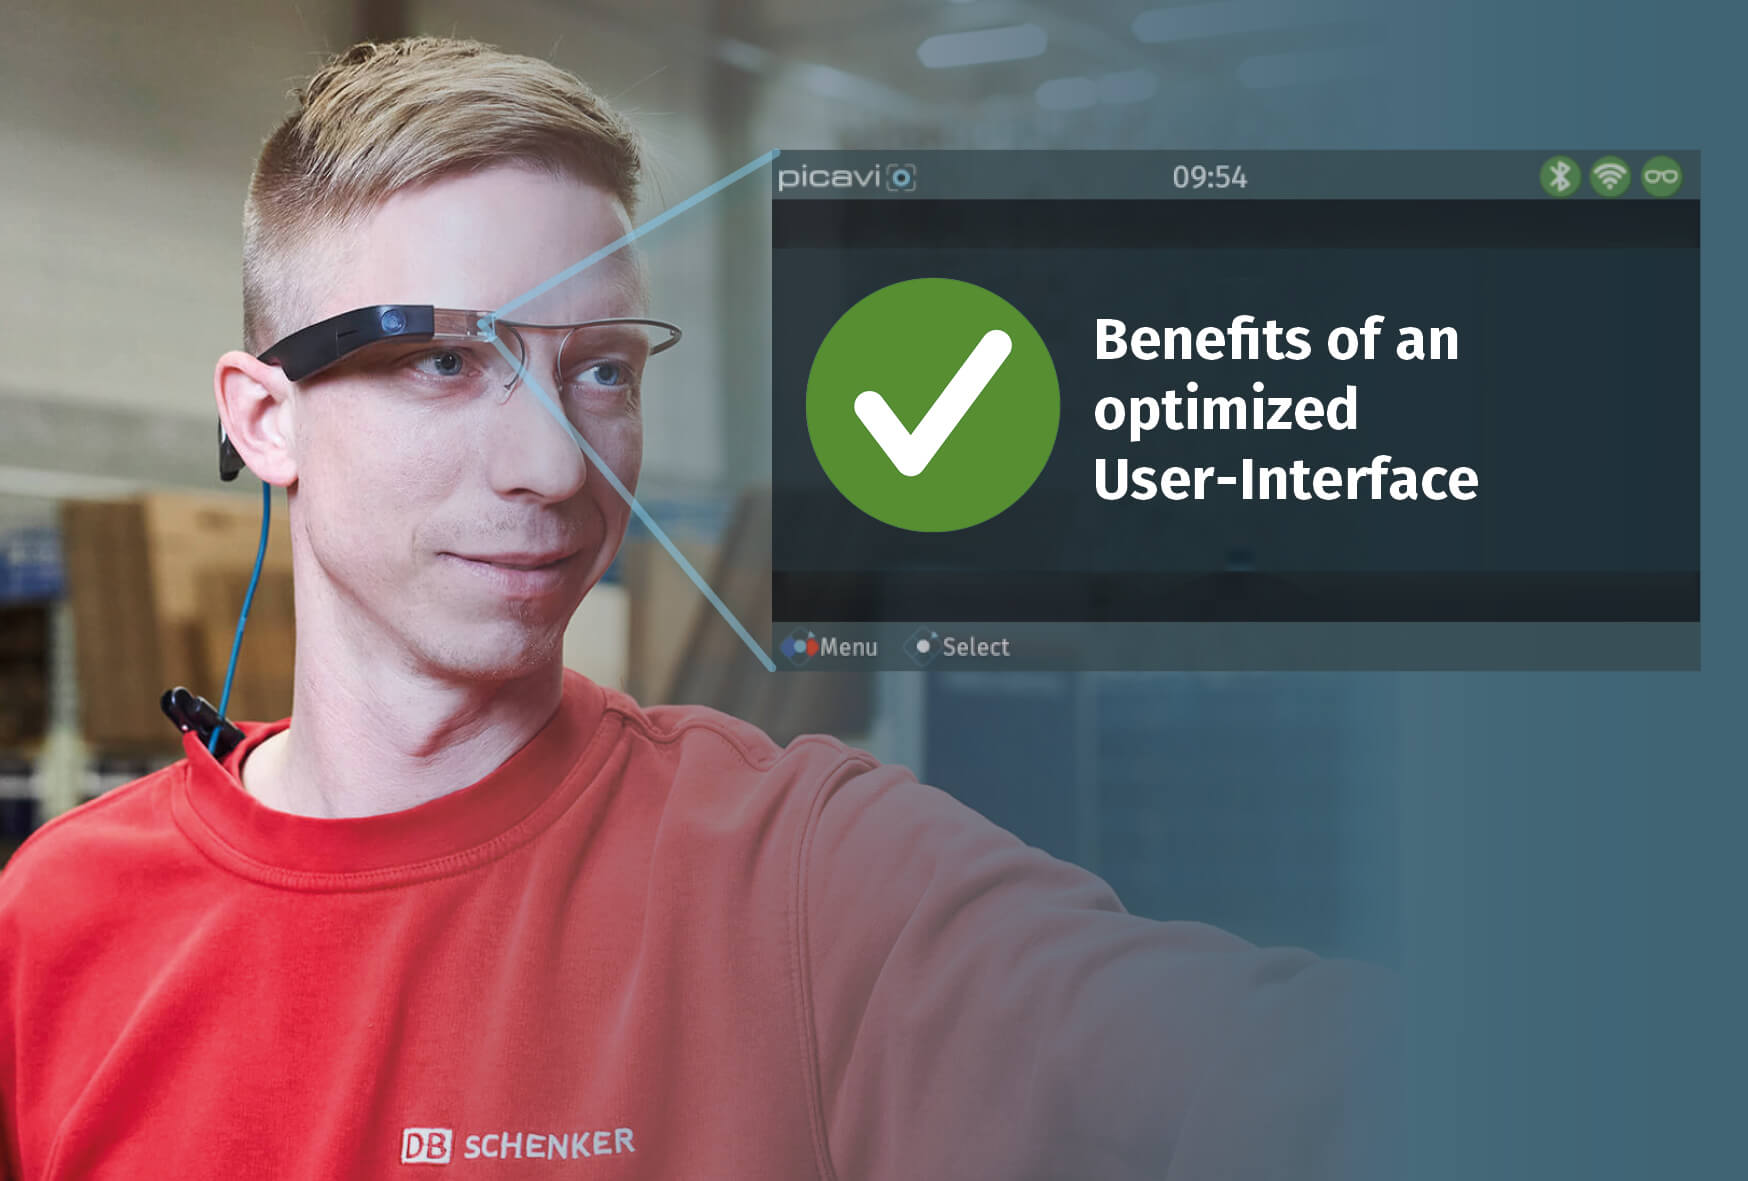 Benefits of an optimized User-Interface